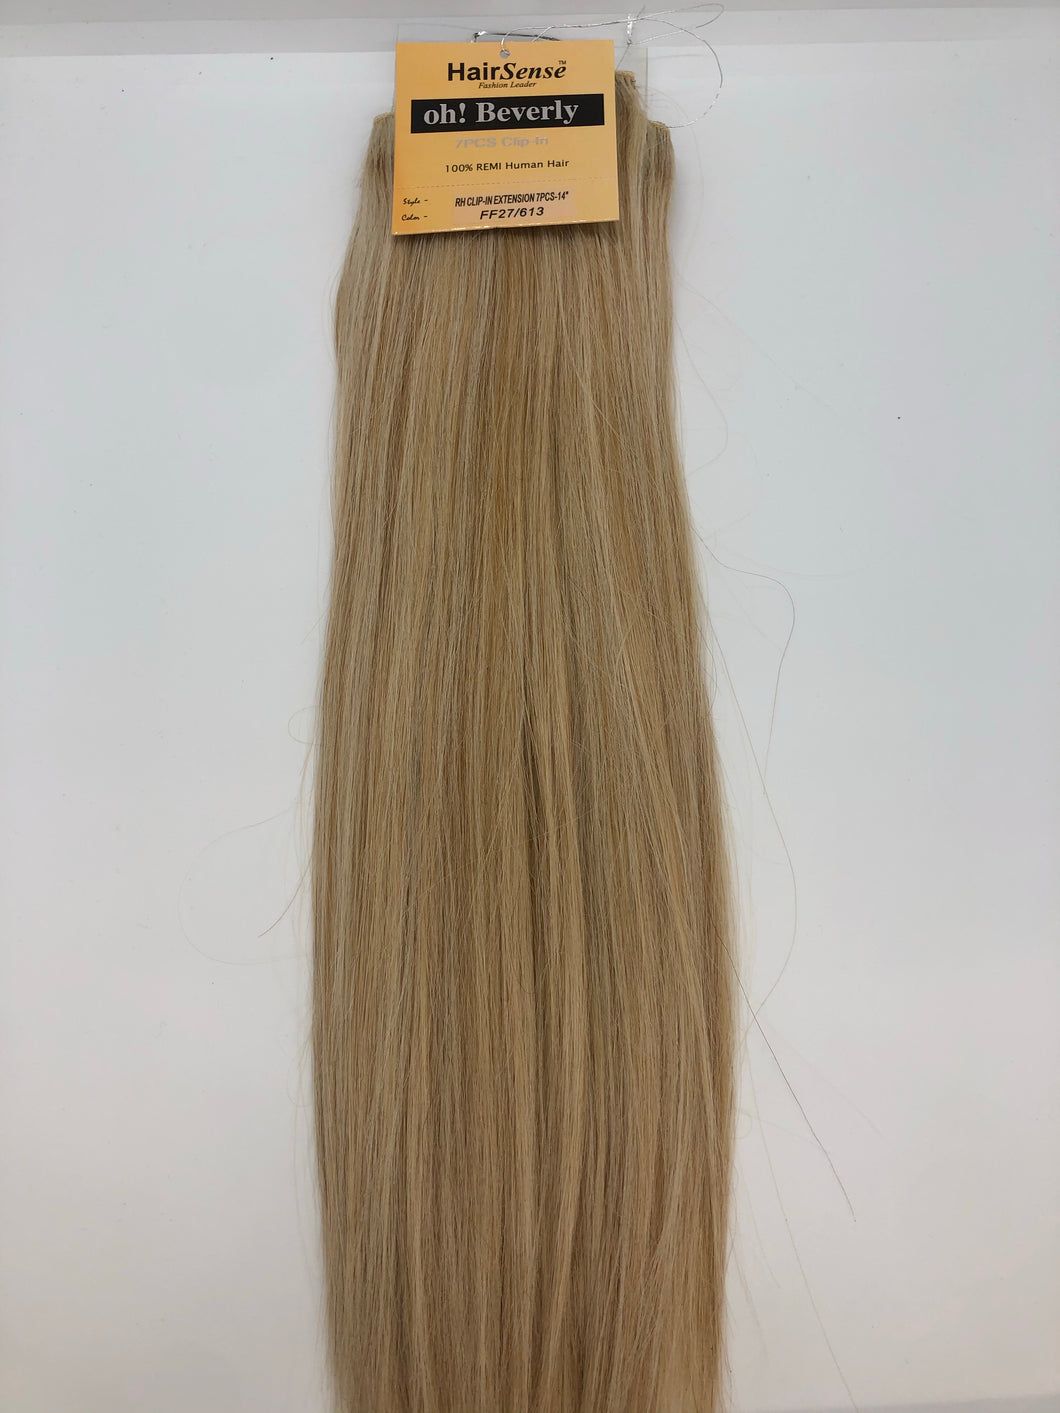 Hair Sense oh! Beverly 7 Piece Clip-In 100% REMI Human Hair Extension - Color: FF27/613